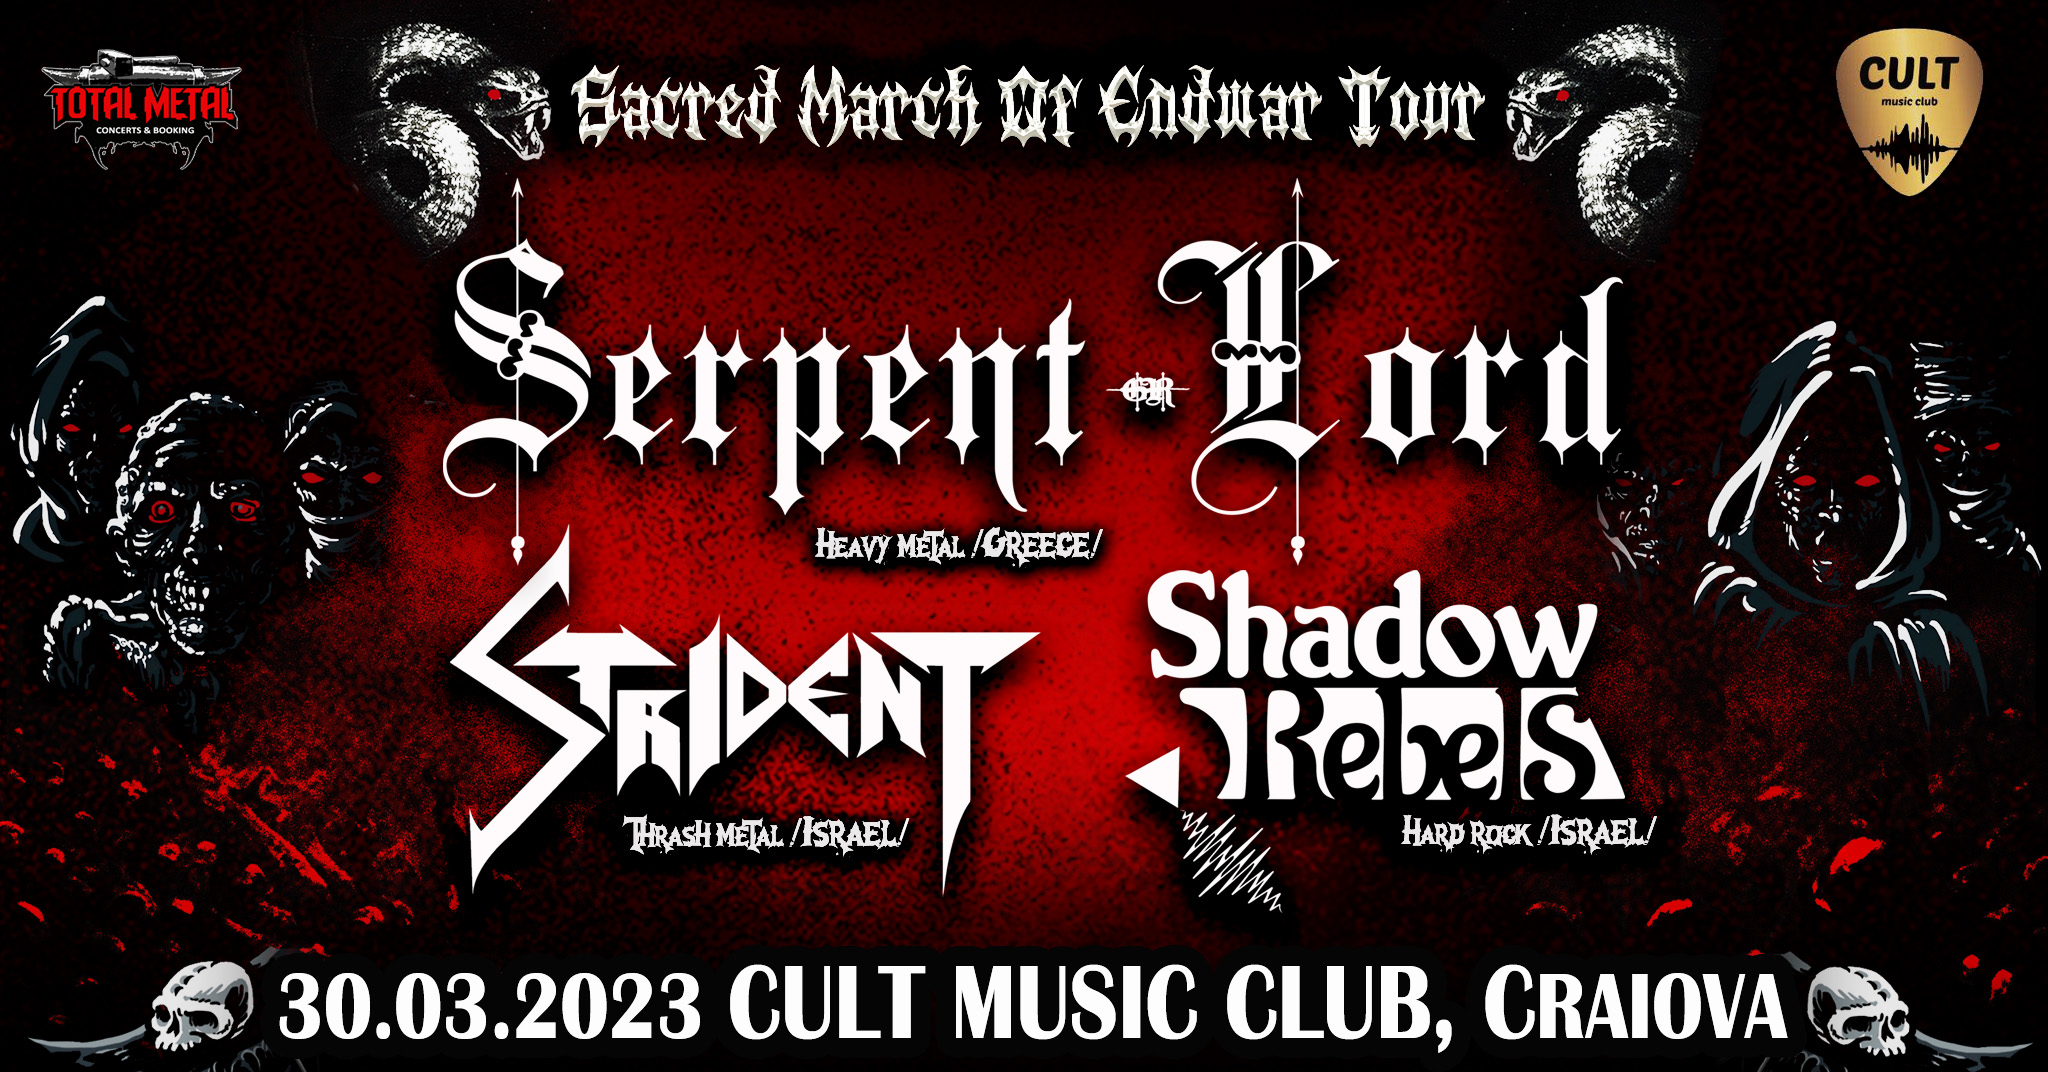 Serpent Lord / Strident / Shadow Rebels Live in Craiova